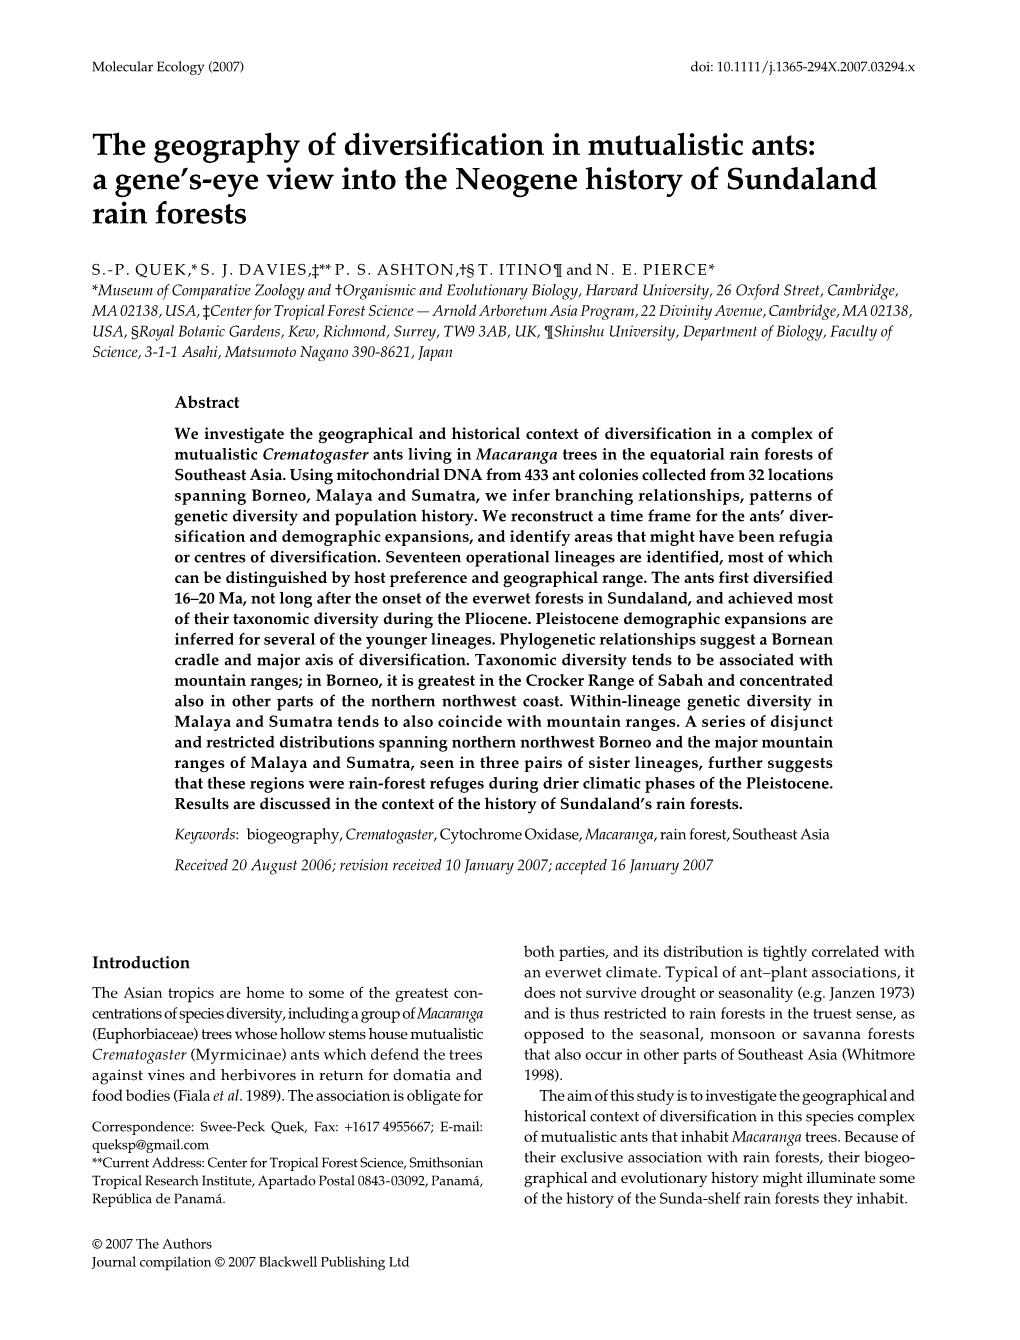 A Gene's-Eye View Into the Neogene History of Sundaland Rain Forests